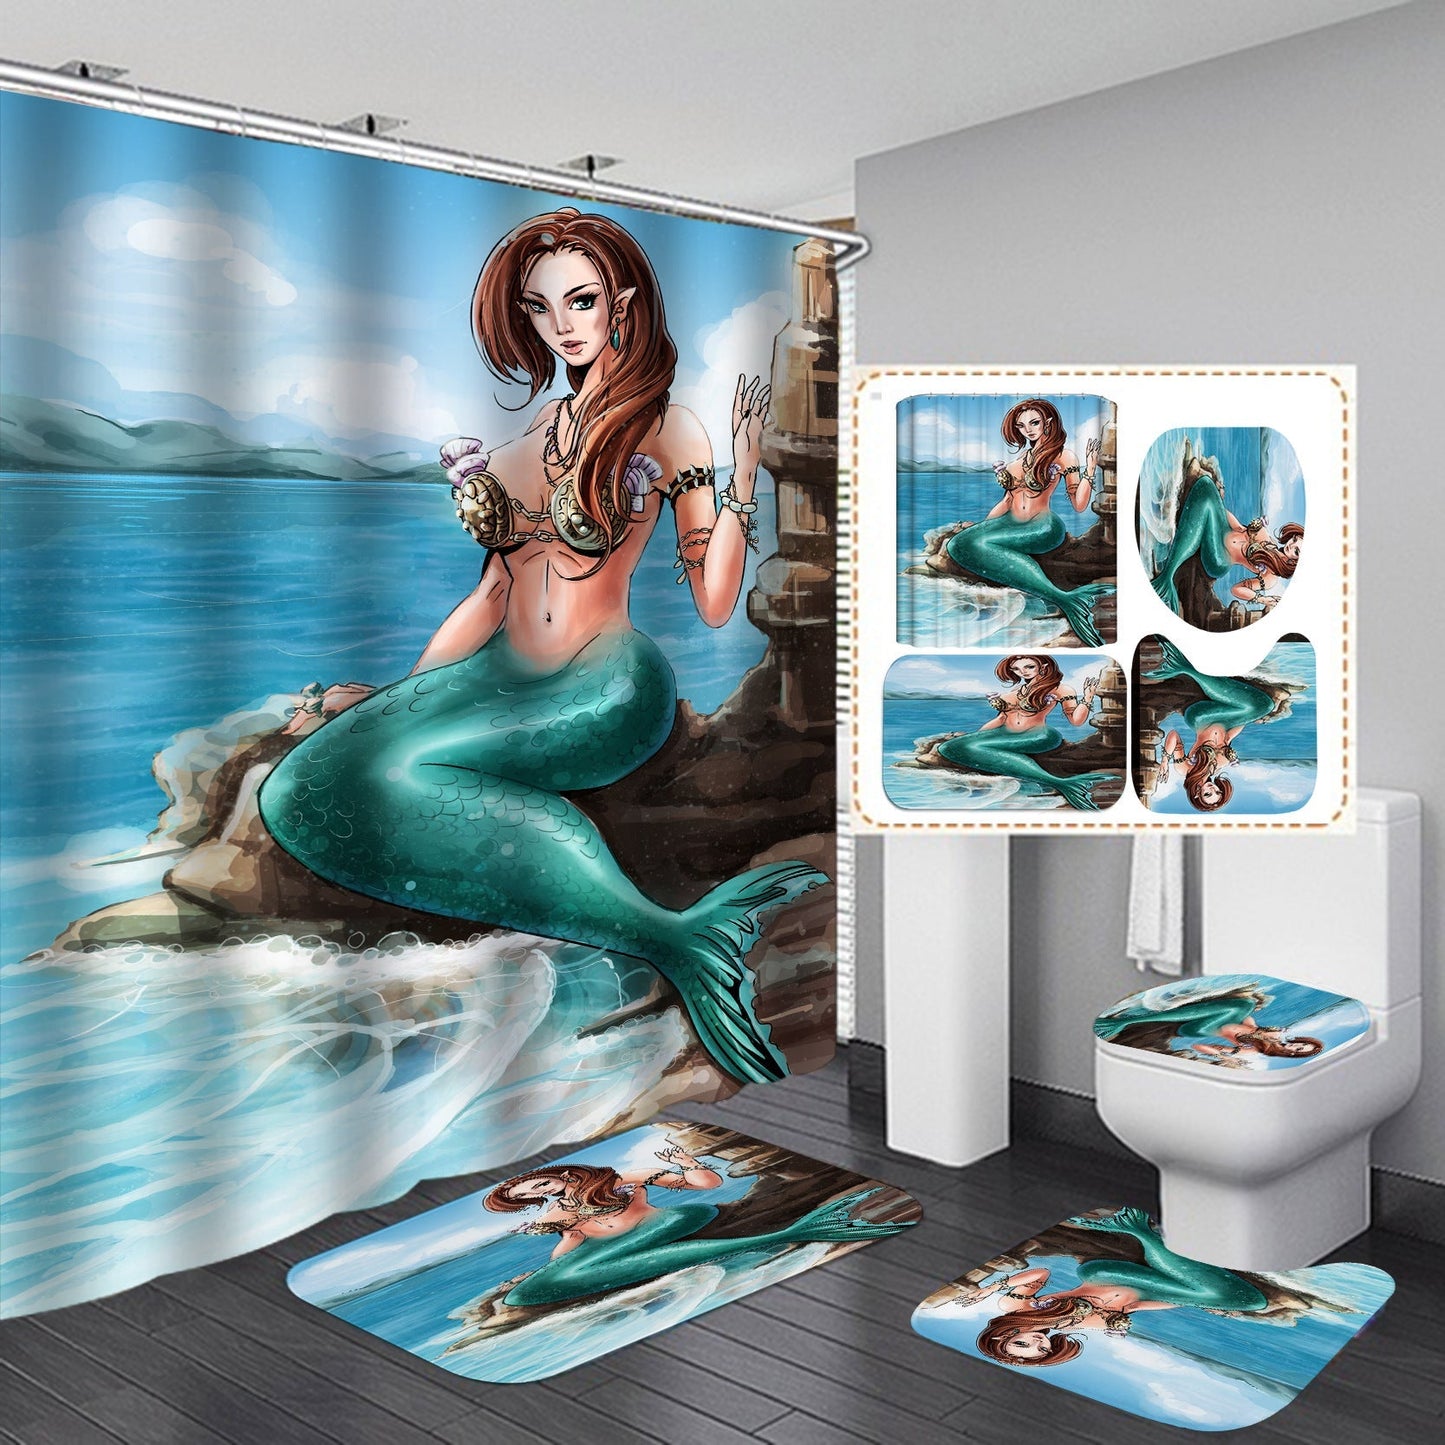 Cartoon Mermaid Design Shower Curtain Bathroom SetsNon-Slip Toilet Lid Cover-Shower Curtain-180×180cm Shower Curtain Only-2-Free Shipping Leatheretro